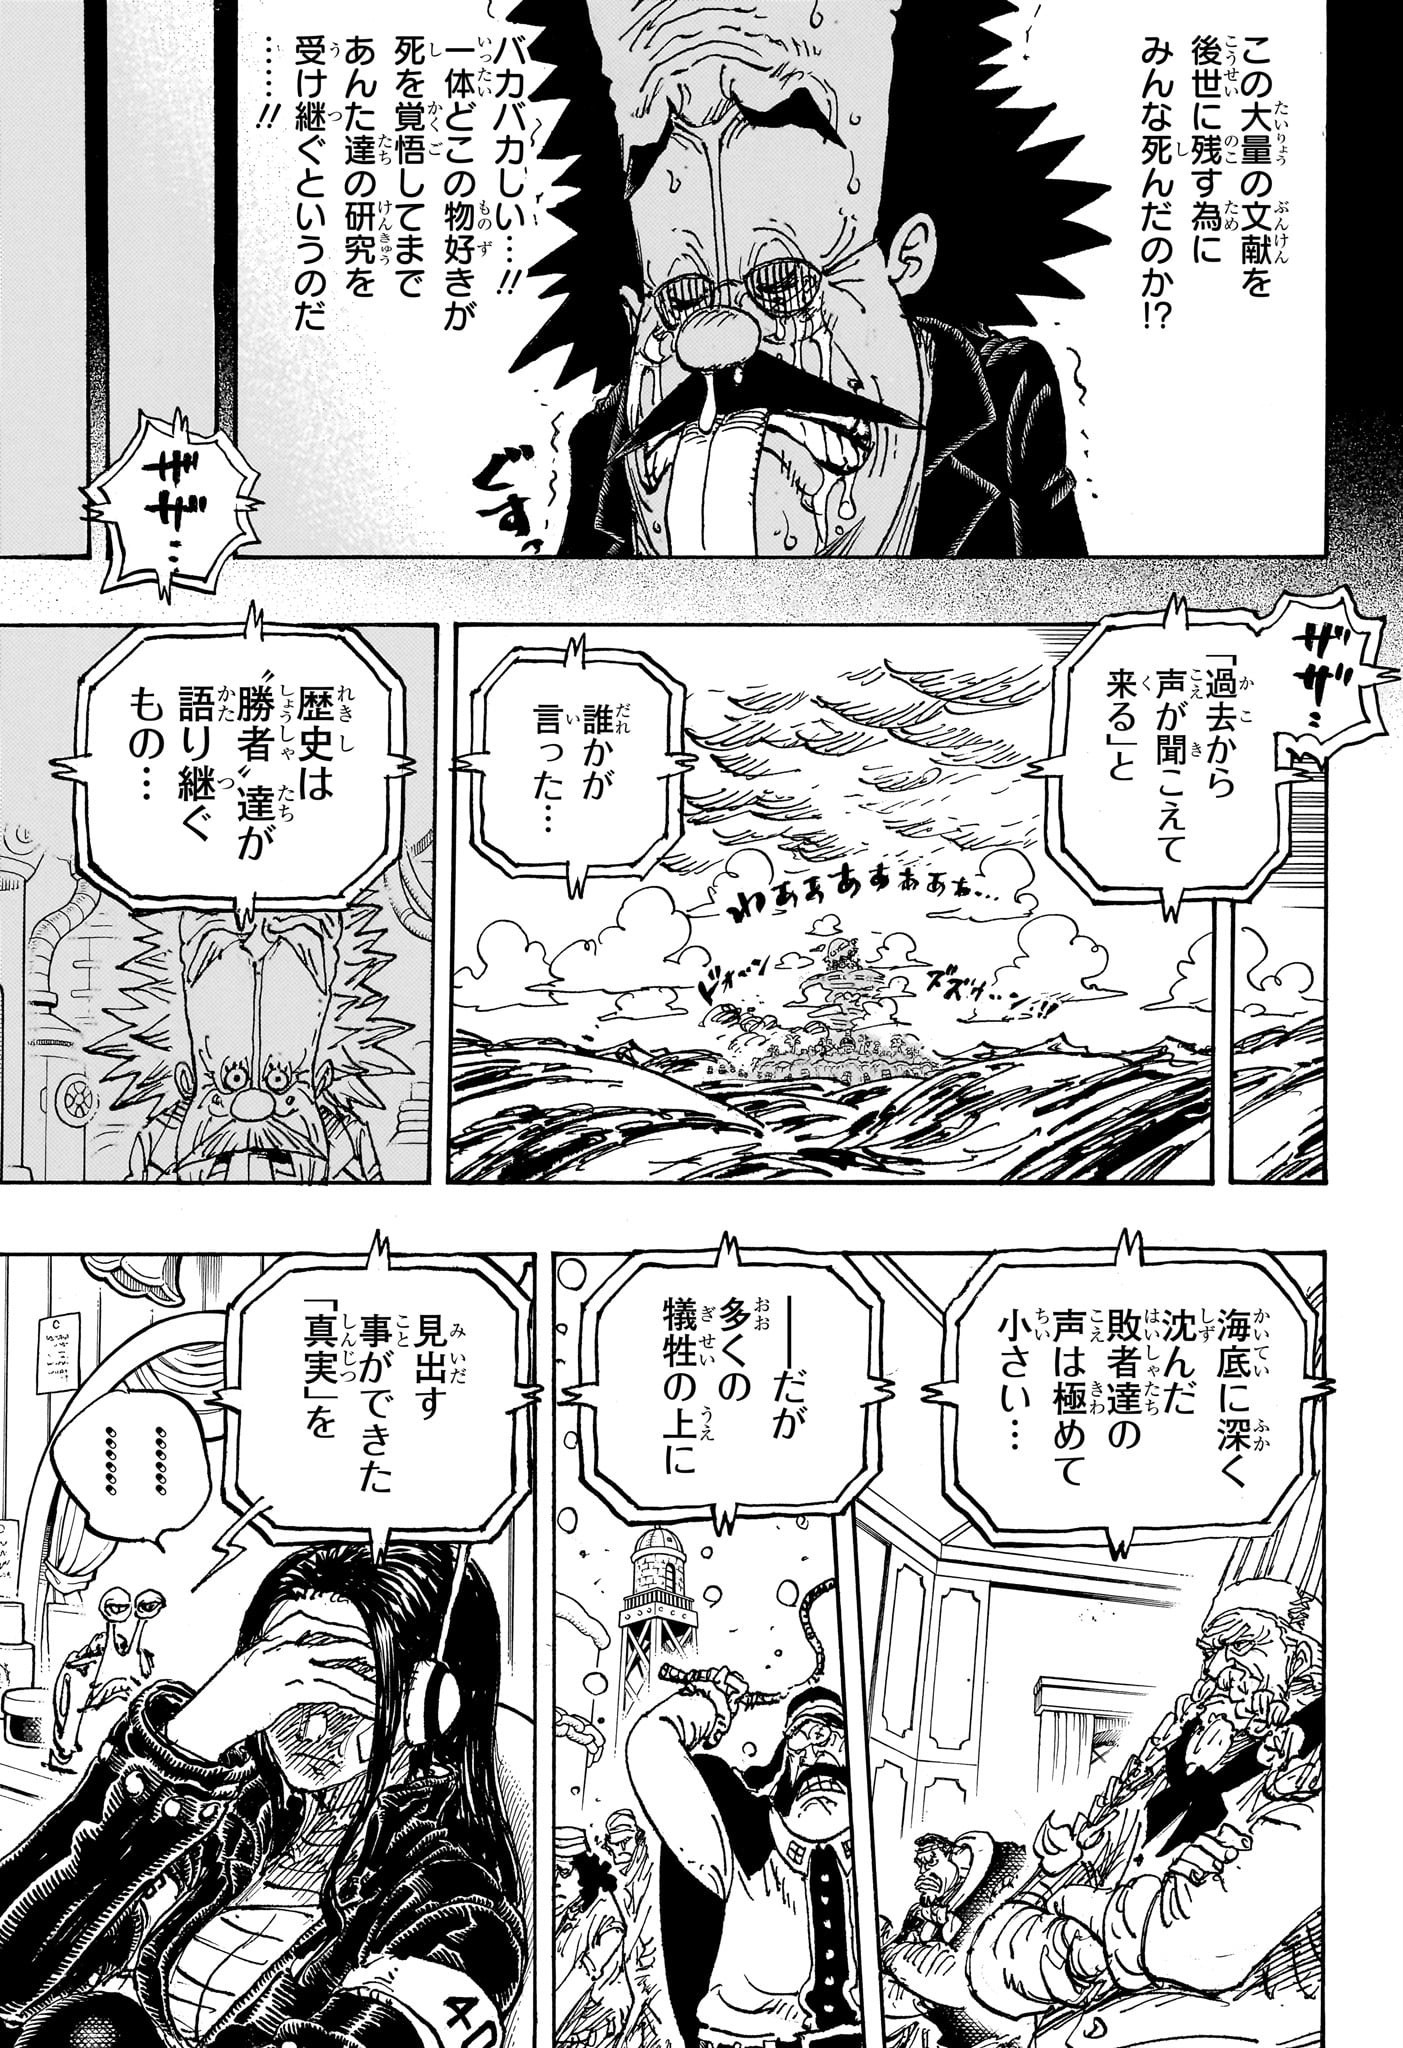 One Piece - Chapter 1120 - Page 5